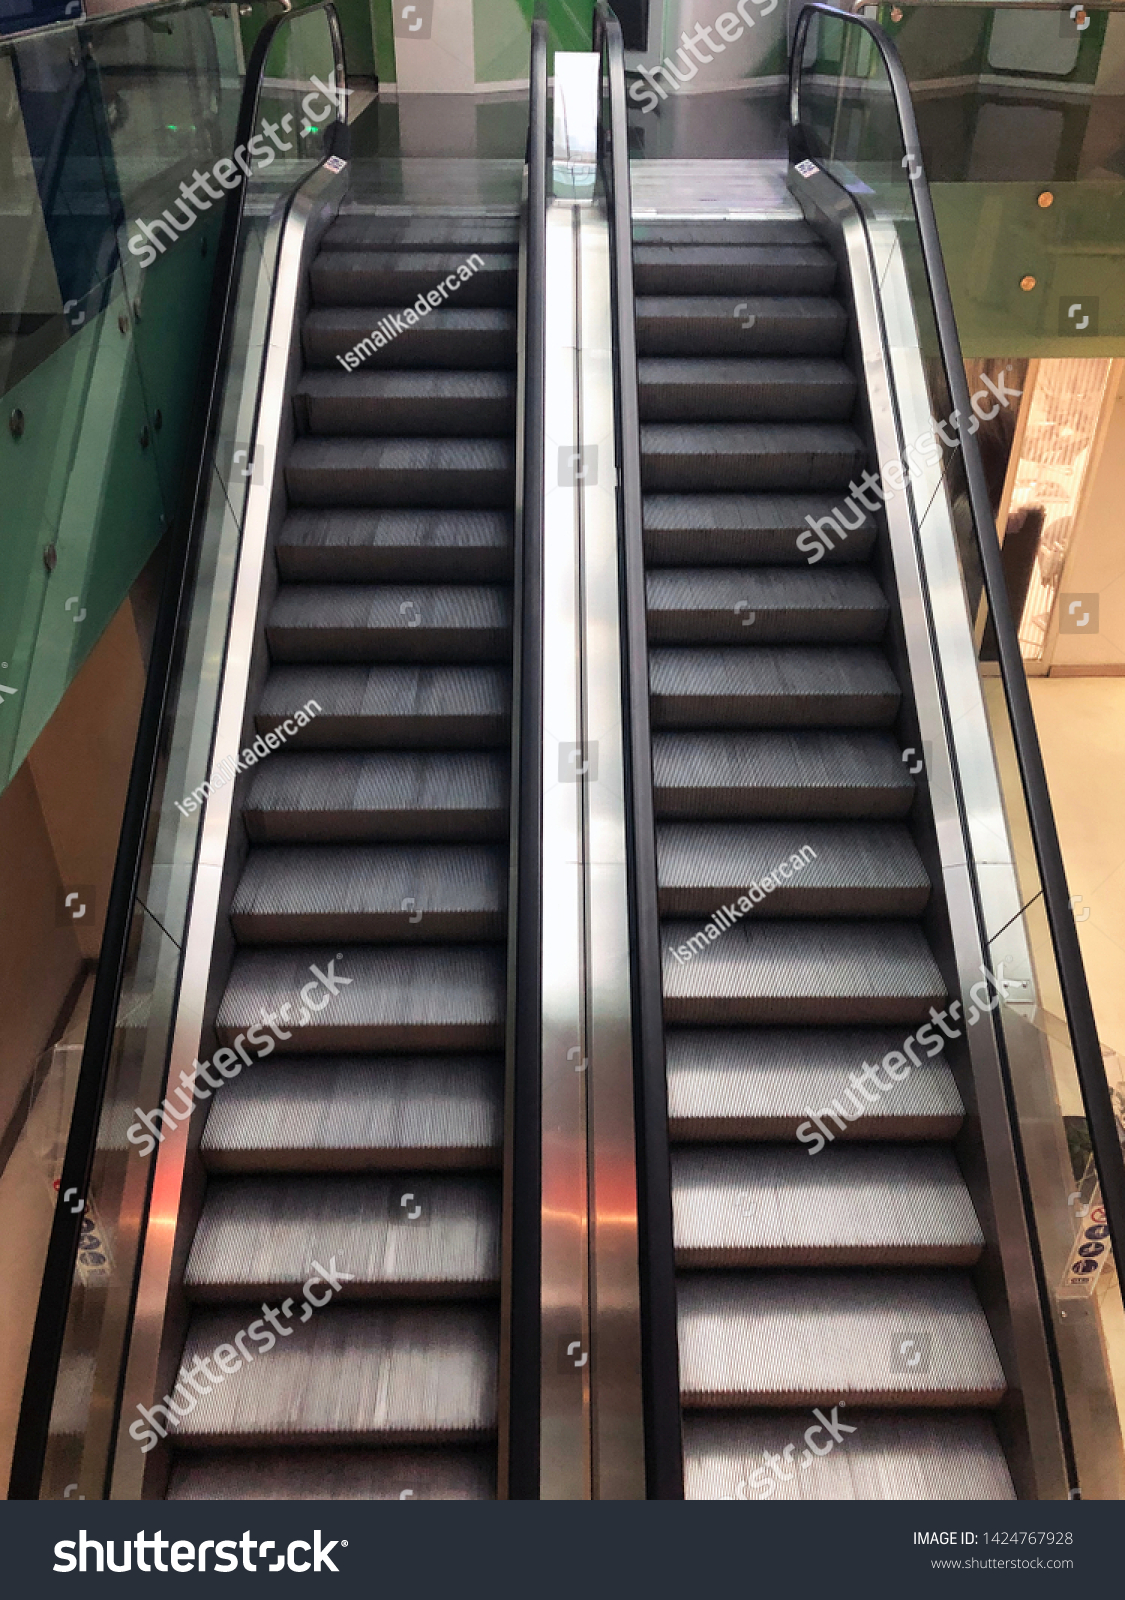 Escalators in a shopping mall. Moving stairways. #1424767928